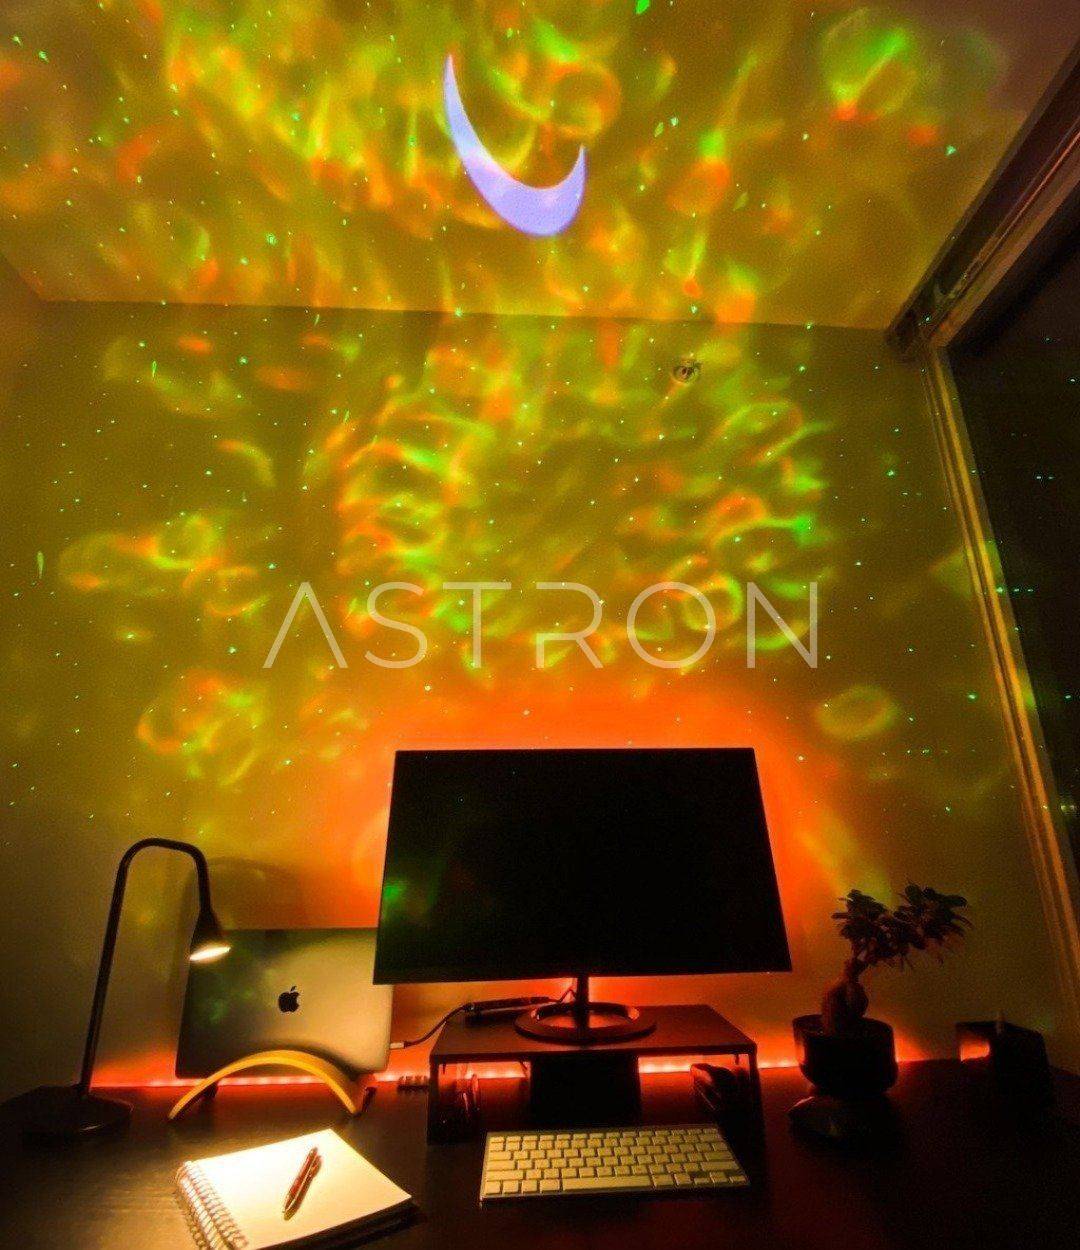 Astron LED Room Projector, star led projector, best star projector, led space room projector, star projector, led lights for room, night time star projector, night light led projector